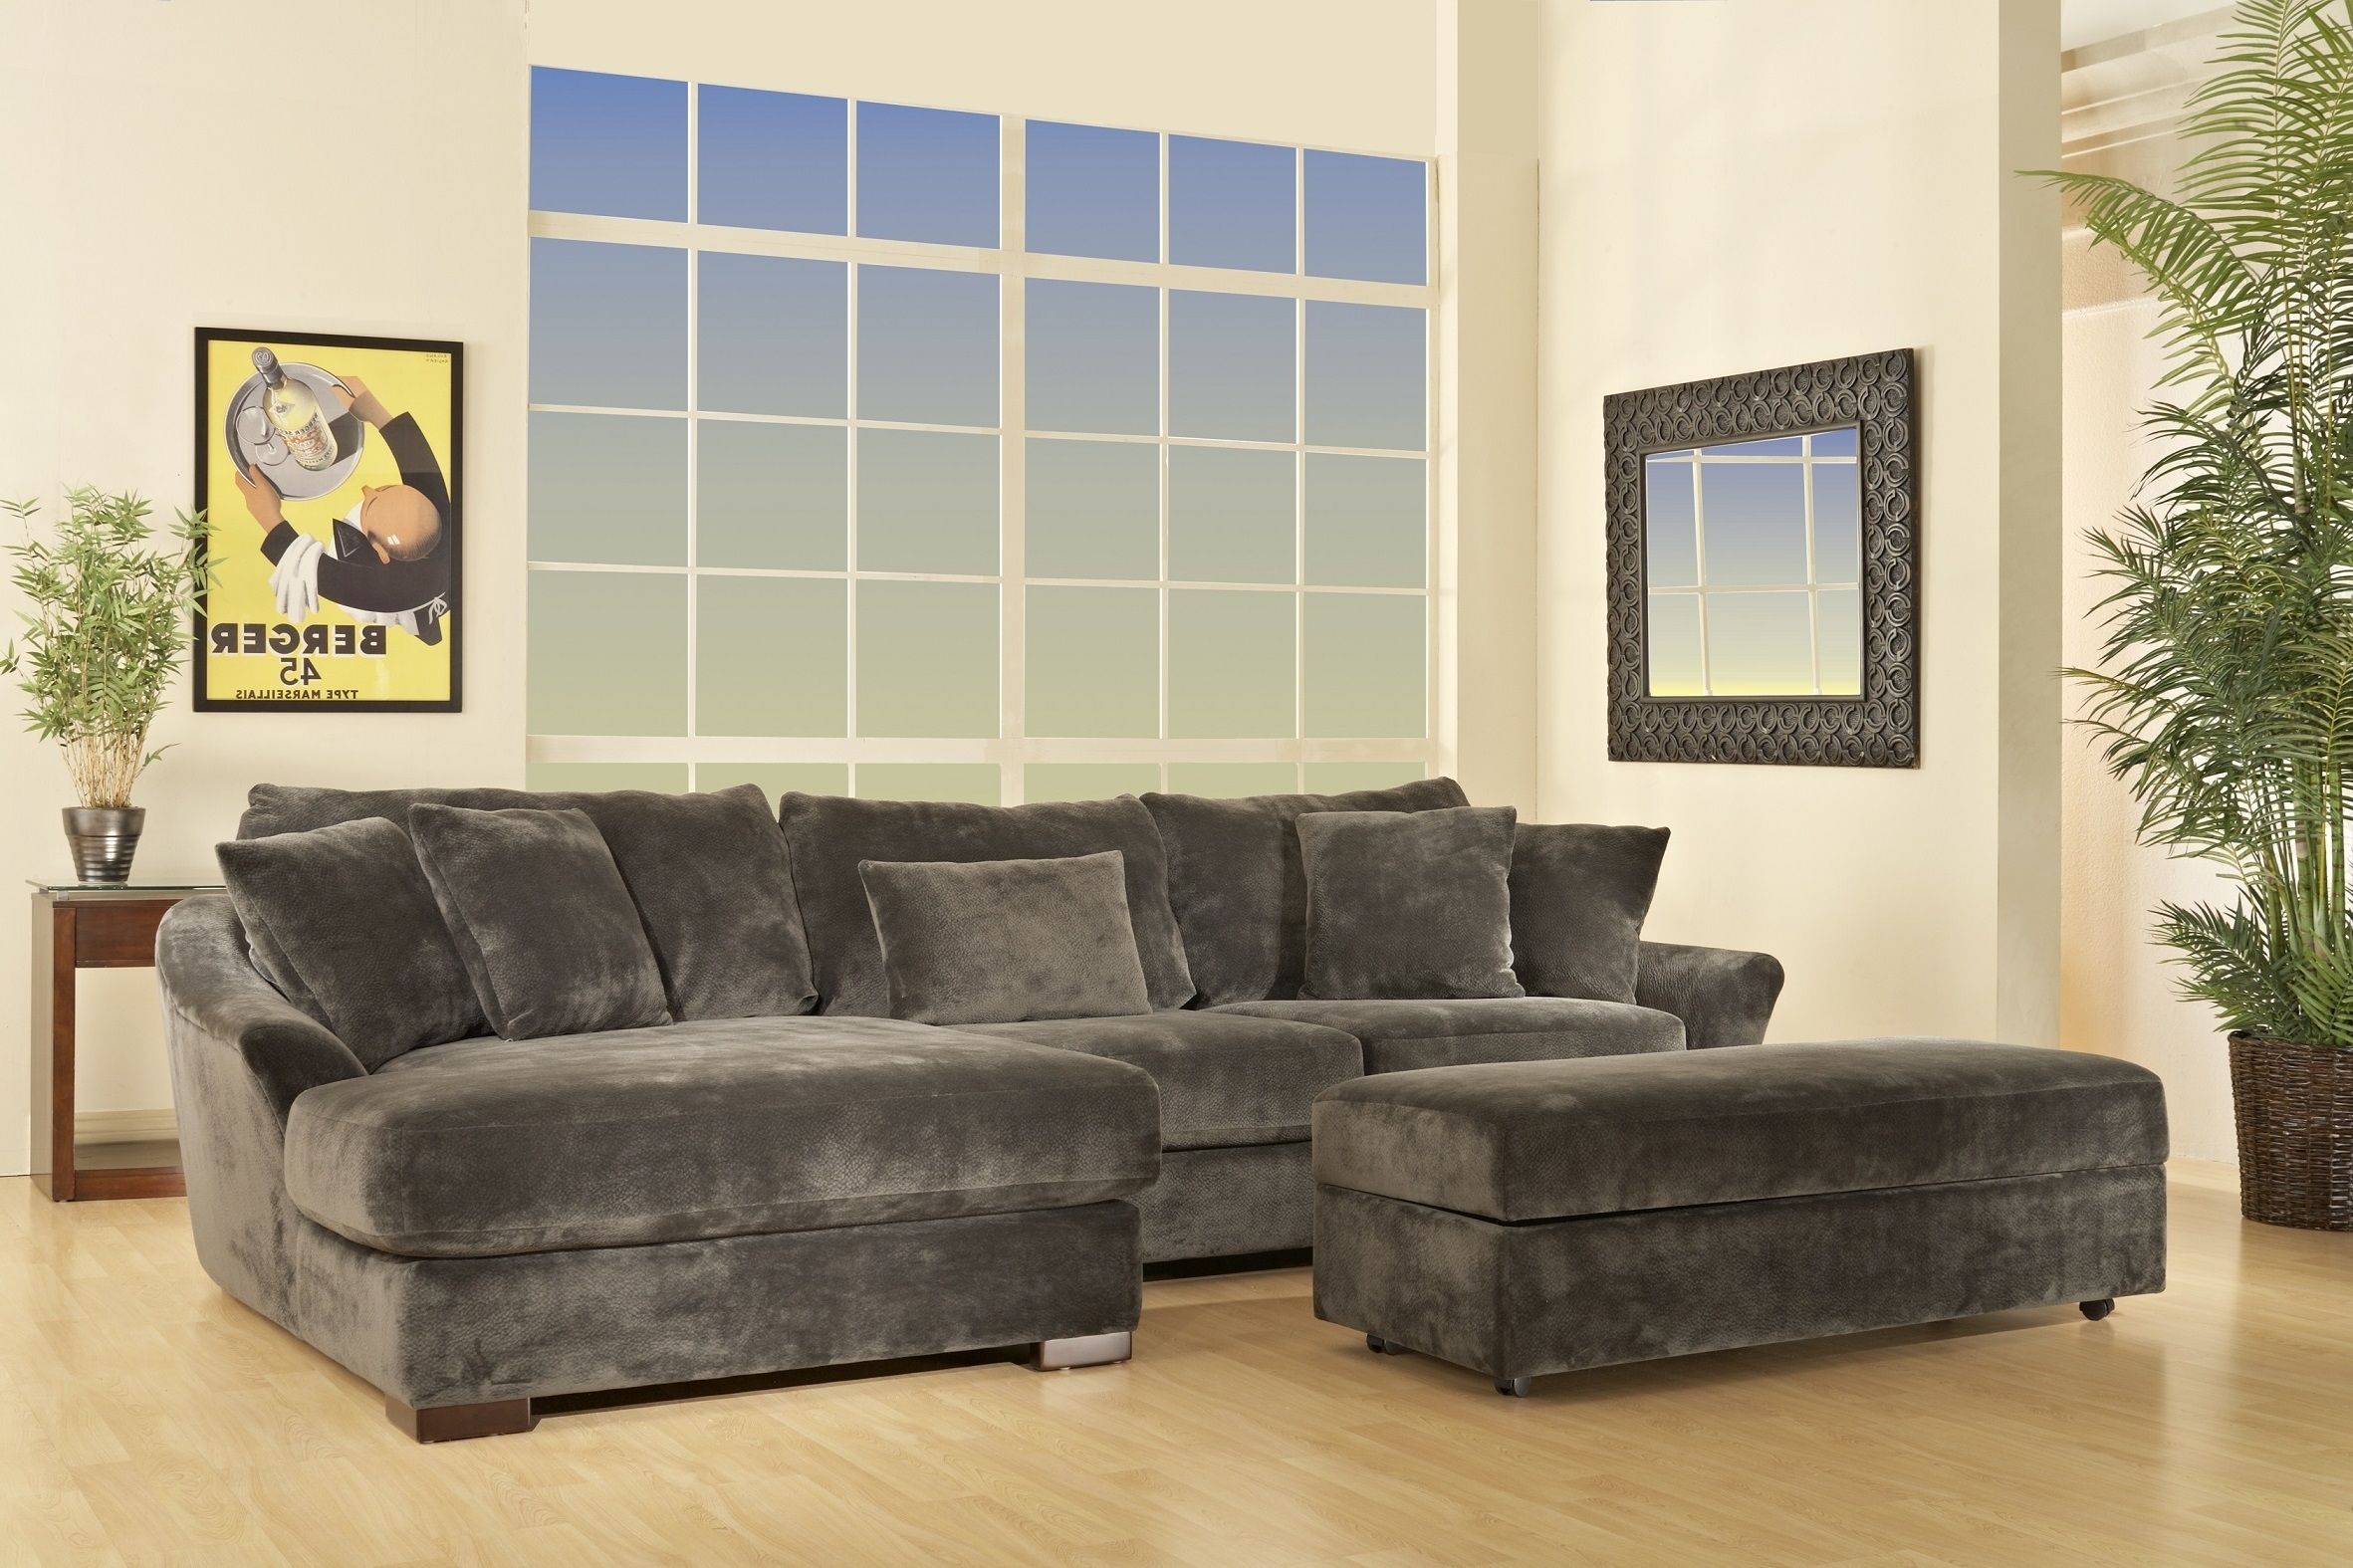 Atlanta Sofa Sectional With Left Arm Chaisefairmont Designs For Sectional Sofas In Atlanta (View 3 of 10)